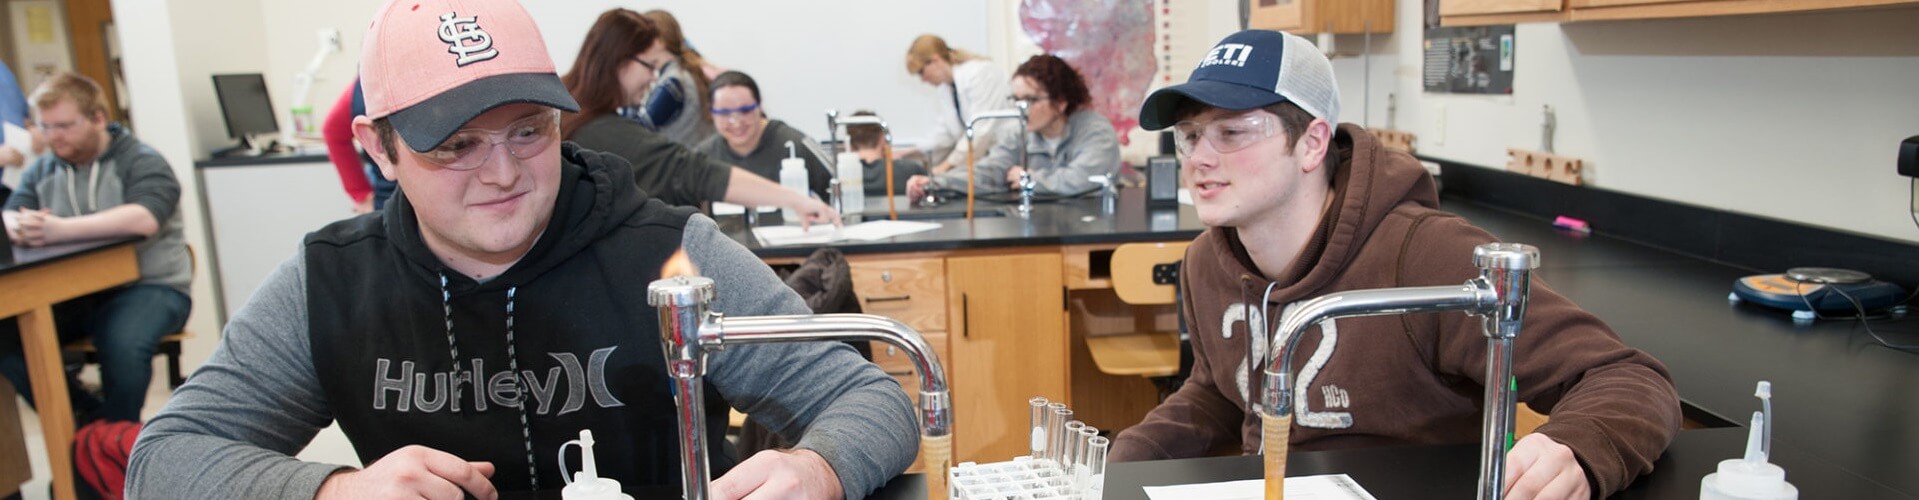 Two students work on an experiment in a chemistry lab